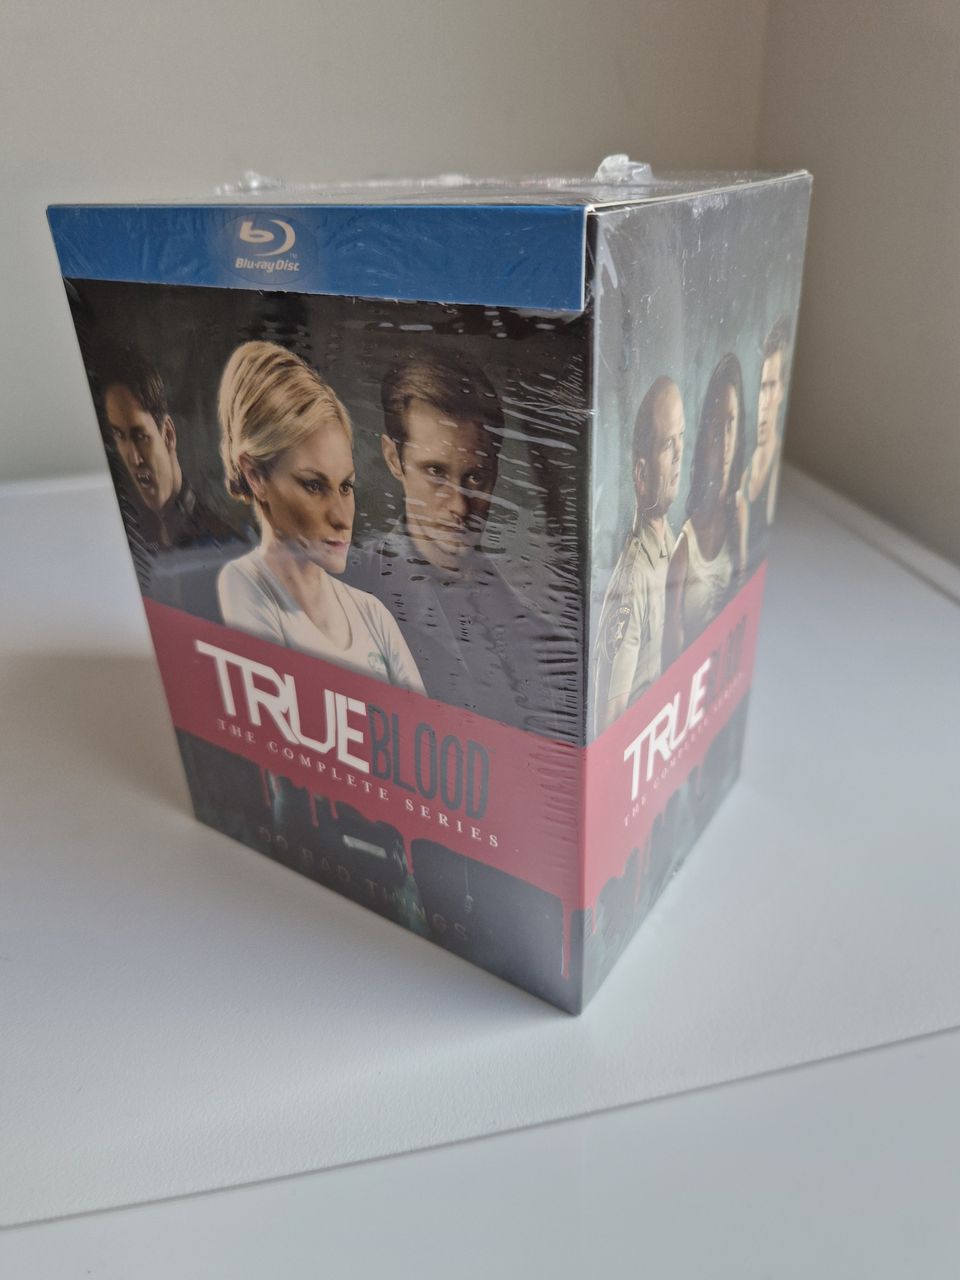 True Blood the complete series blu-ray box